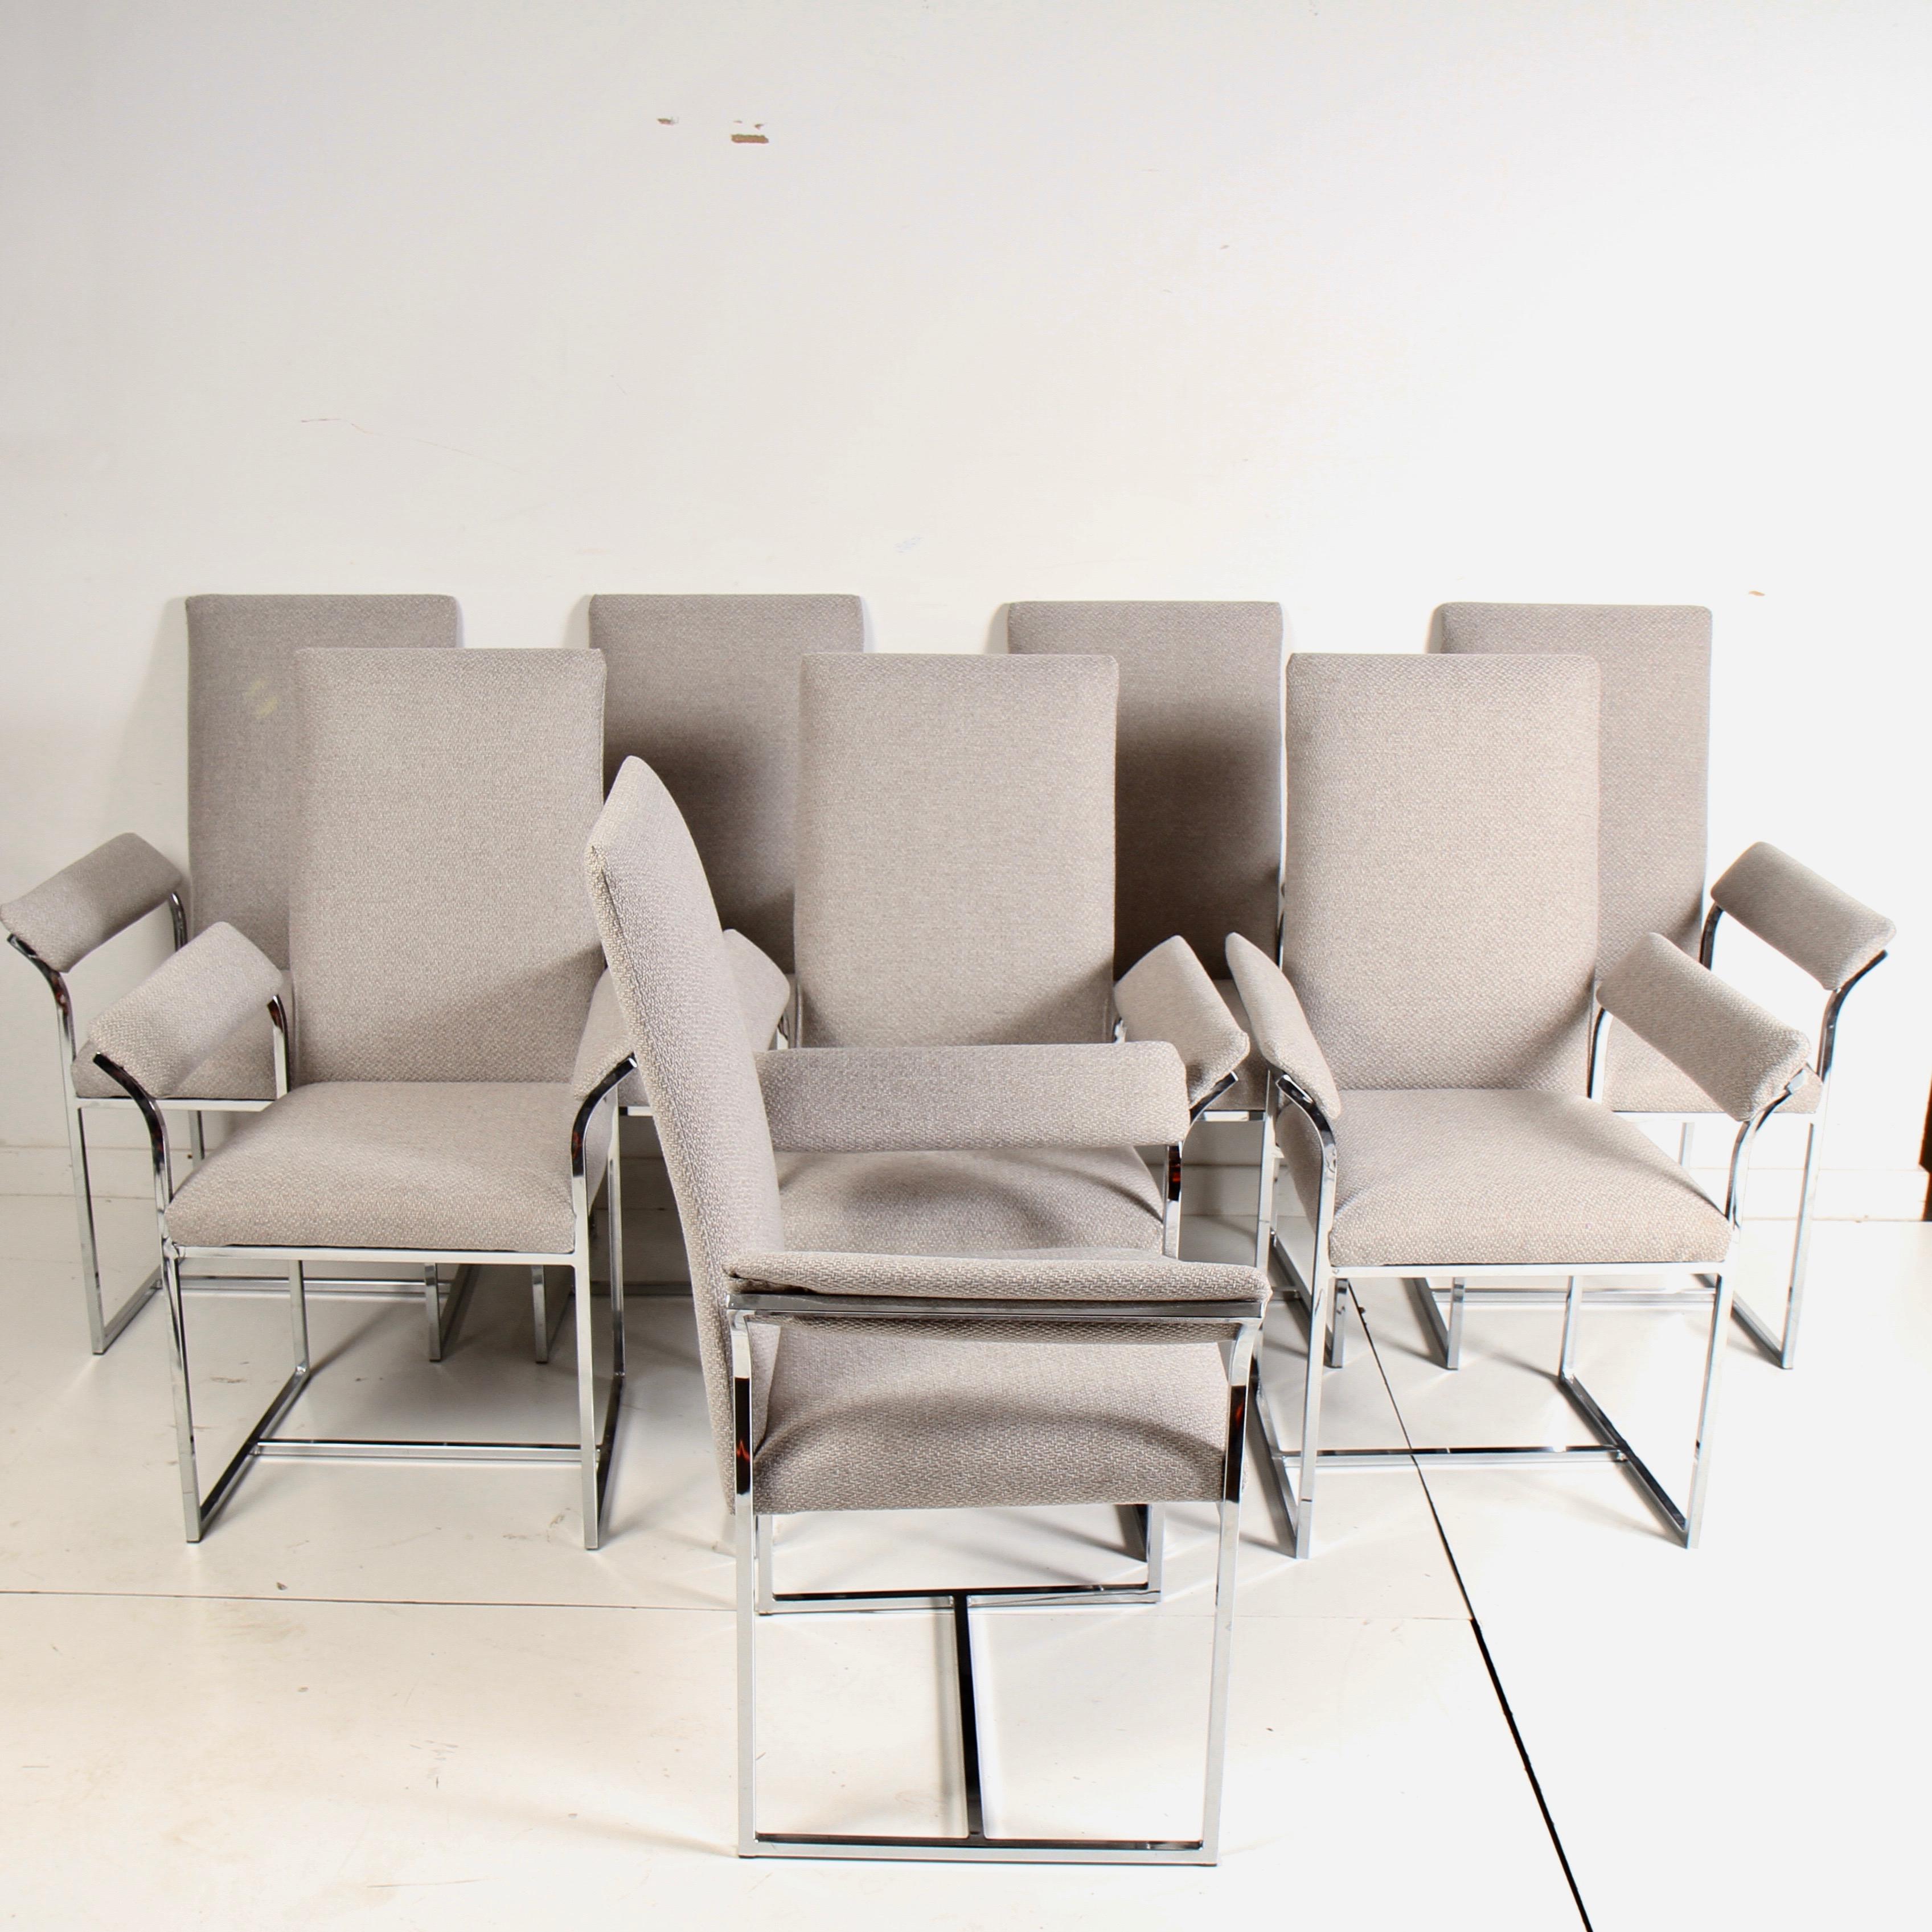 Set of 8 armchairs in the manner of Baughman that are freshly reupholstered and ready for another 40 years of entertaining. Chrome frames are in very clean original condition with no pitting or corrosion of any kind. Fabric is a light grey weave.